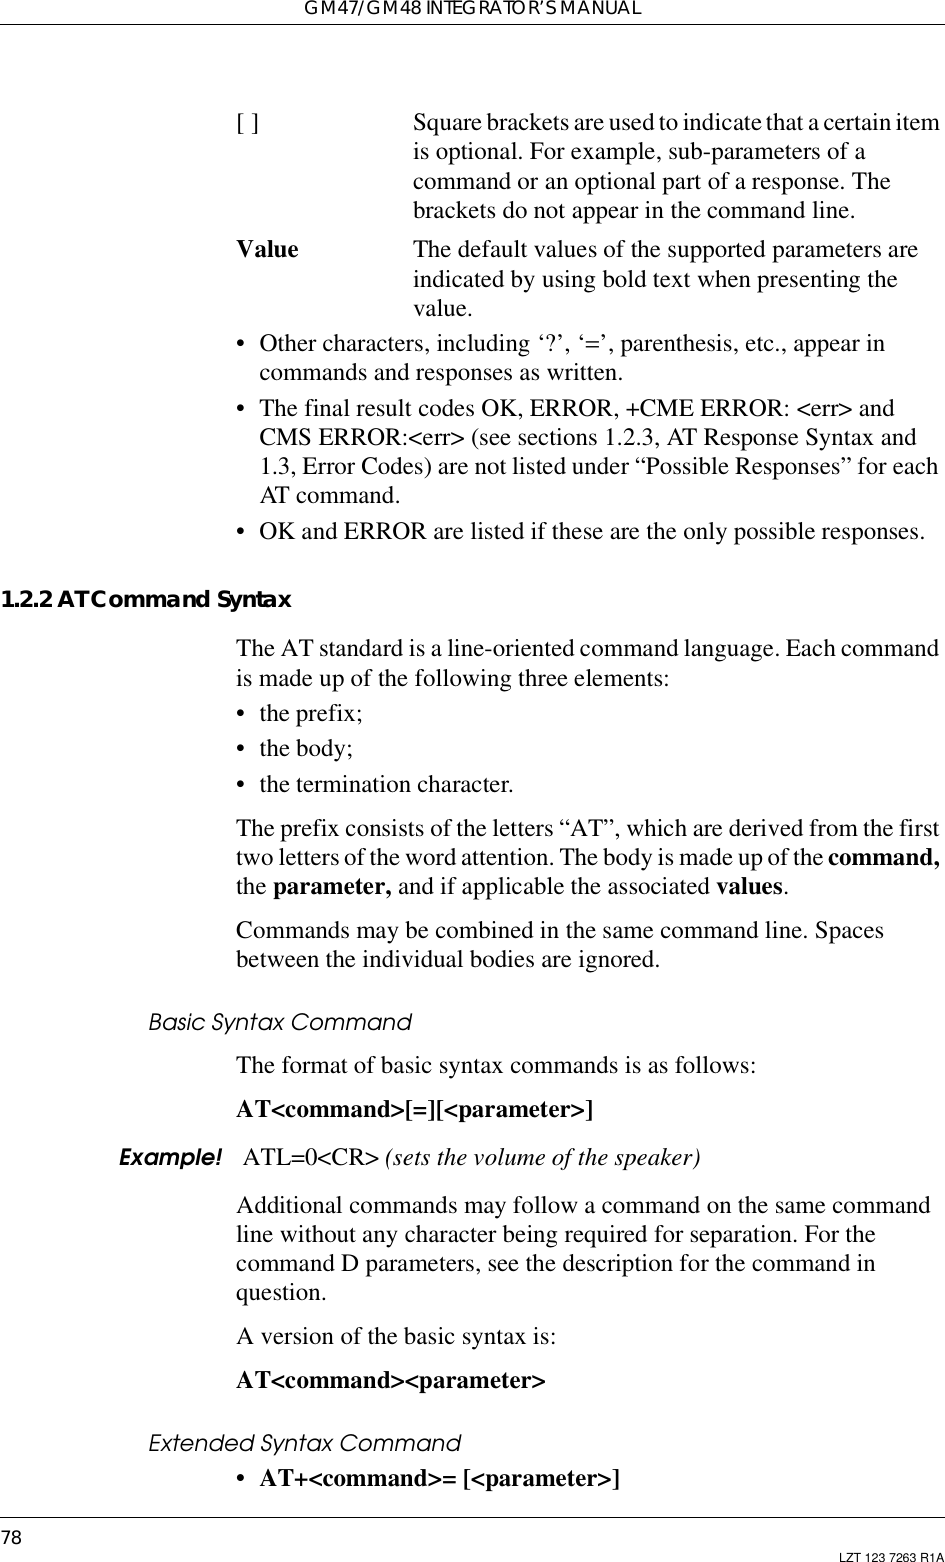 GM47/GM48 INTEGRATOR’S MANUAL78 LZT 123 7263 R1A[ ] Square brackets are used to indicatethat a certainitemis optional. For example, sub-parameters of acommand or an optional part of a response. Thebrackets do not appear in the command line.Value The default values of the supported parameters areindicated by using bold text when presenting thevalue.• Other characters, including ‘?’, ‘=’, parenthesis, etc., appear incommands and responses as written.• The final result codes OK, ERROR, +CME ERROR: &lt;err&gt; andCMS ERROR:&lt;err&gt; (see sections 1.2.3, AT Response Syntax and1.3, Error Codes) are not listed under “Possible Responses” for eachAT command.• OK and ERROR are listed if these are the only possible responses.1.2.2 AT Command SyntaxThe AT standard is a line-oriented command language. Each commandis made up of the following three elements:• the prefix;• the body;• the termination character.The prefix consists of the letters “AT”, which are derived from the firsttwo letters of the word attention. The body is made up of the command,the parameter, and if applicable the associated values.Commands may be combined in the same command line. Spacesbetween the individual bodies are ignored.Basic Syntax CommandThe format of basic syntax commands is as follows:AT&lt;command&gt;[=][&lt;parameter&gt;]Example! ATL=0&lt;CR&gt; (sets the volume of the speaker)Additional commands may follow a command on the same commandline without any character being required for separation. For thecommand D parameters, see the description for the command inquestion.A version of the basic syntax is:AT&lt;command&gt;&lt;parameter&gt;Extended Syntax Command• AT+&lt;command&gt;= [&lt;parameter&gt;]